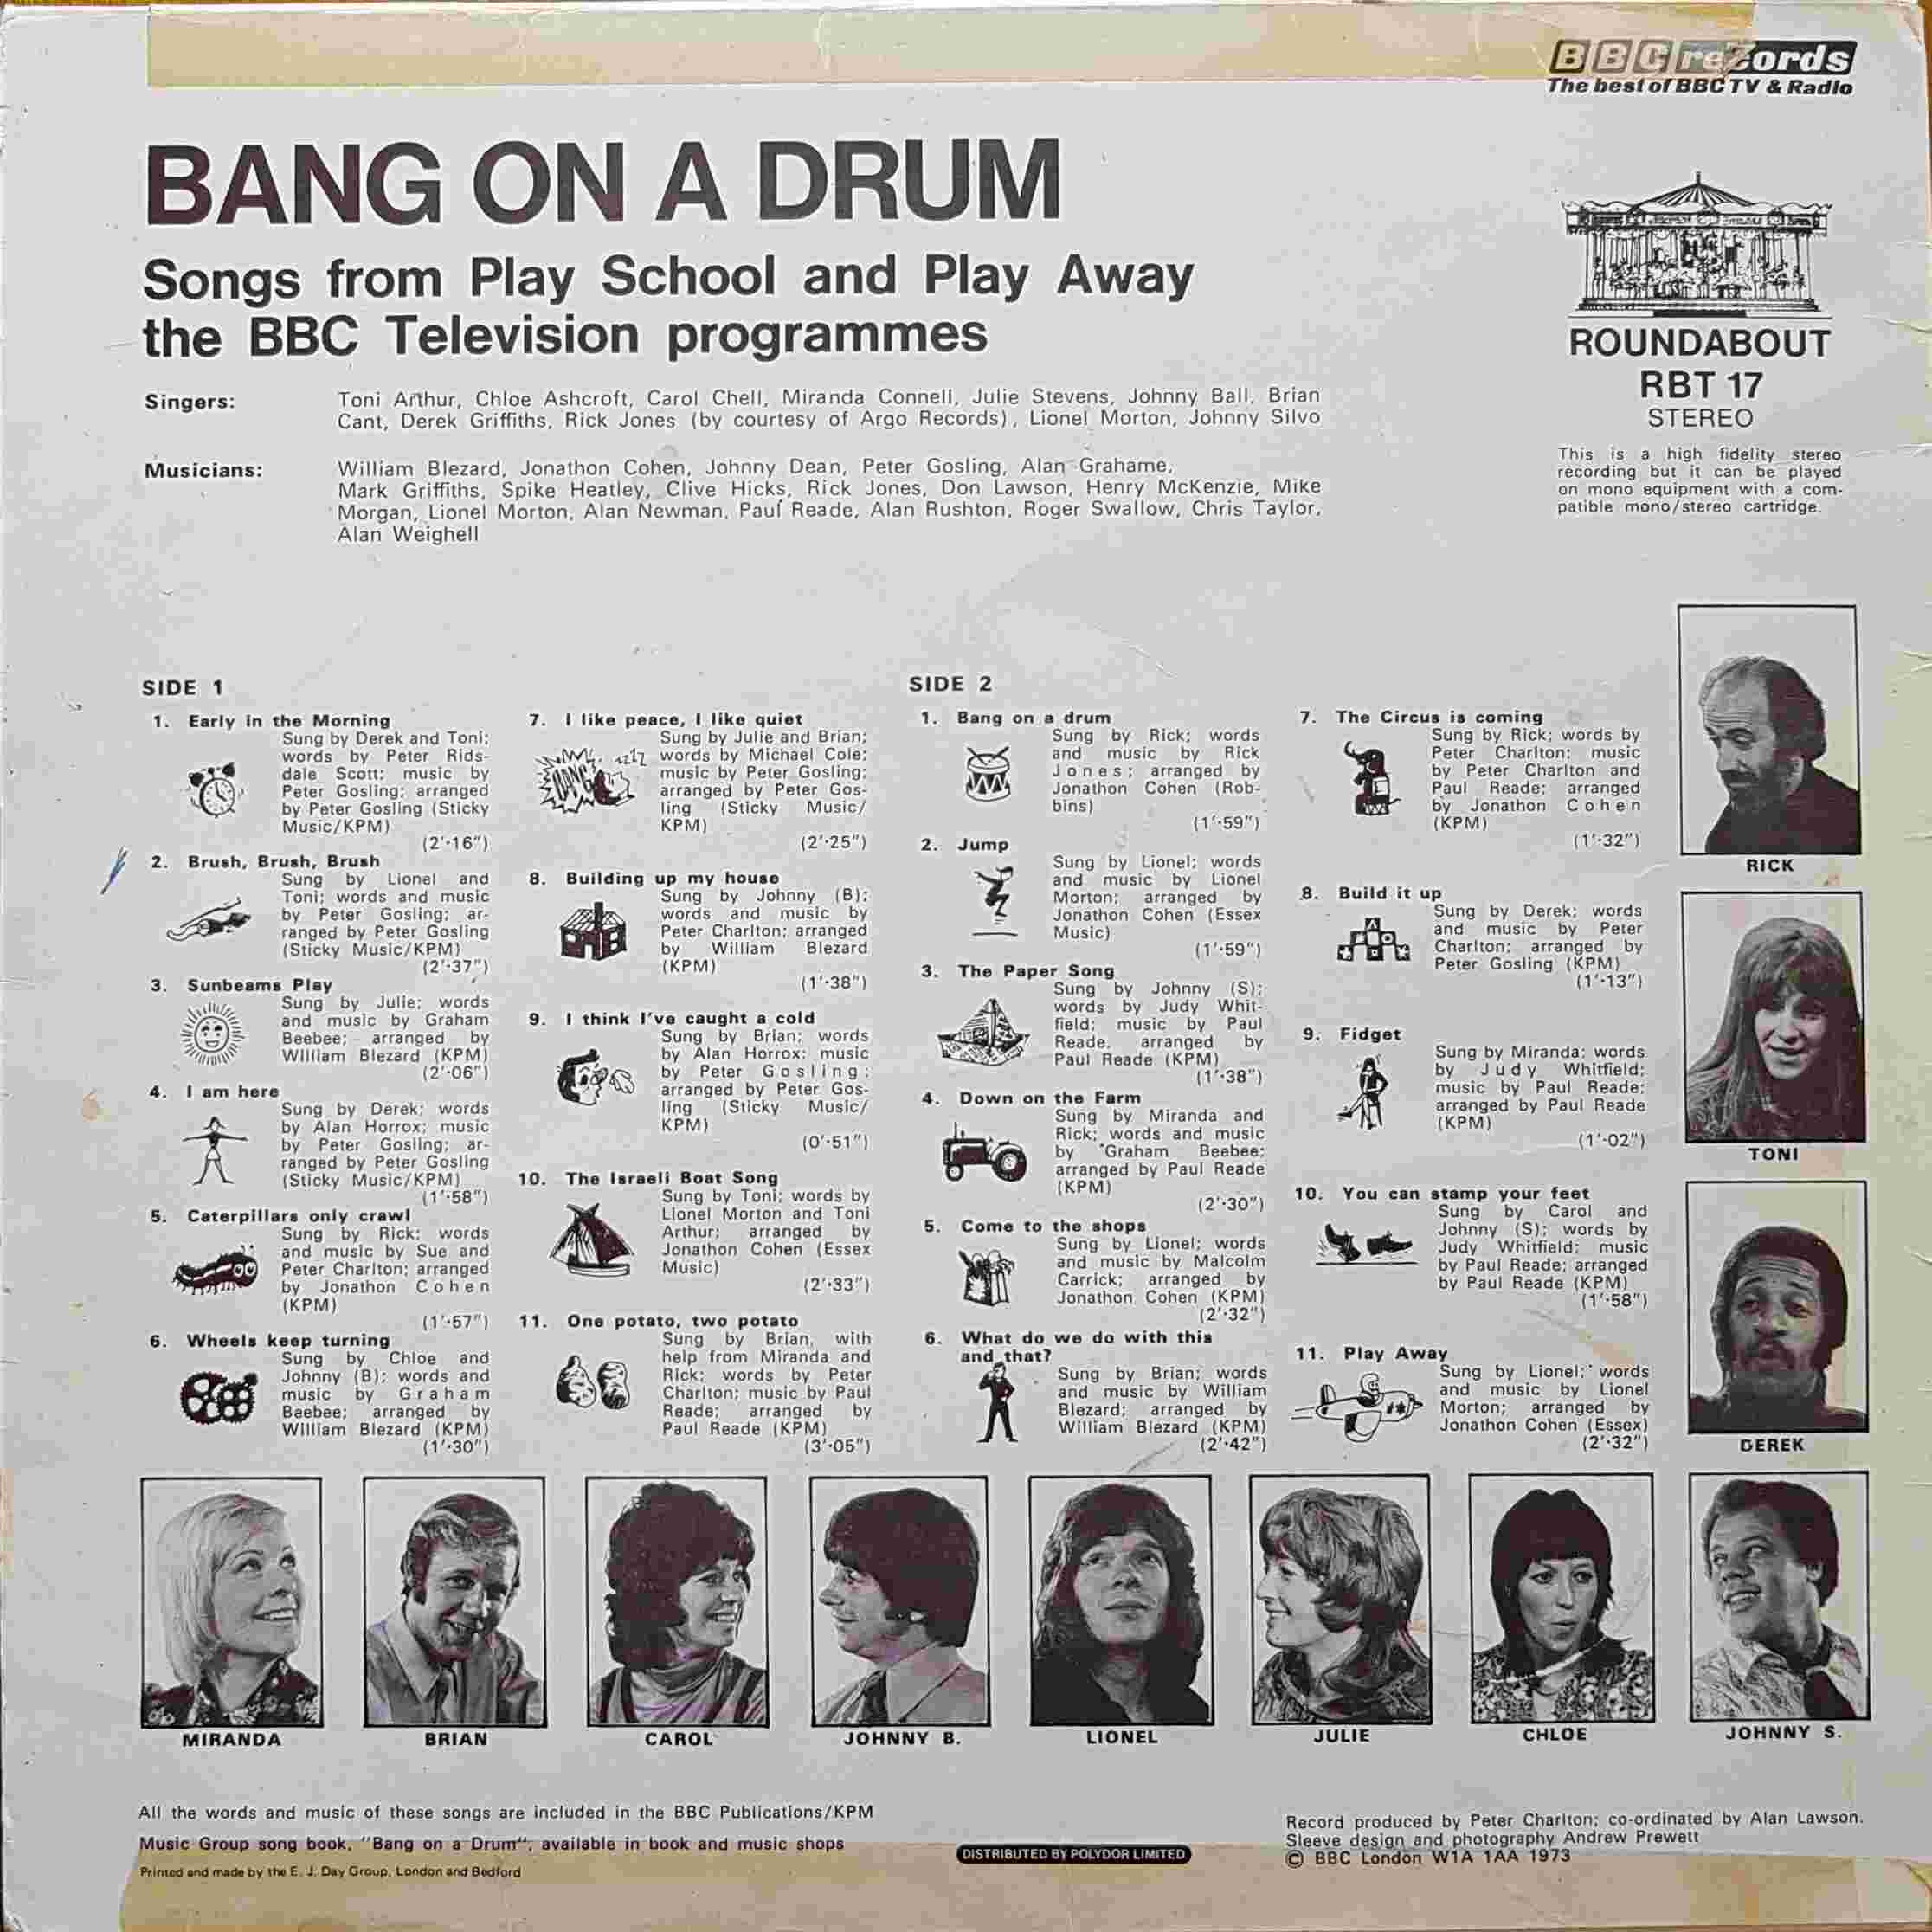 Picture of RBT 17 Bang on a drum - Songs from Play School and Play Away  by artist Various from the BBC records and Tapes library